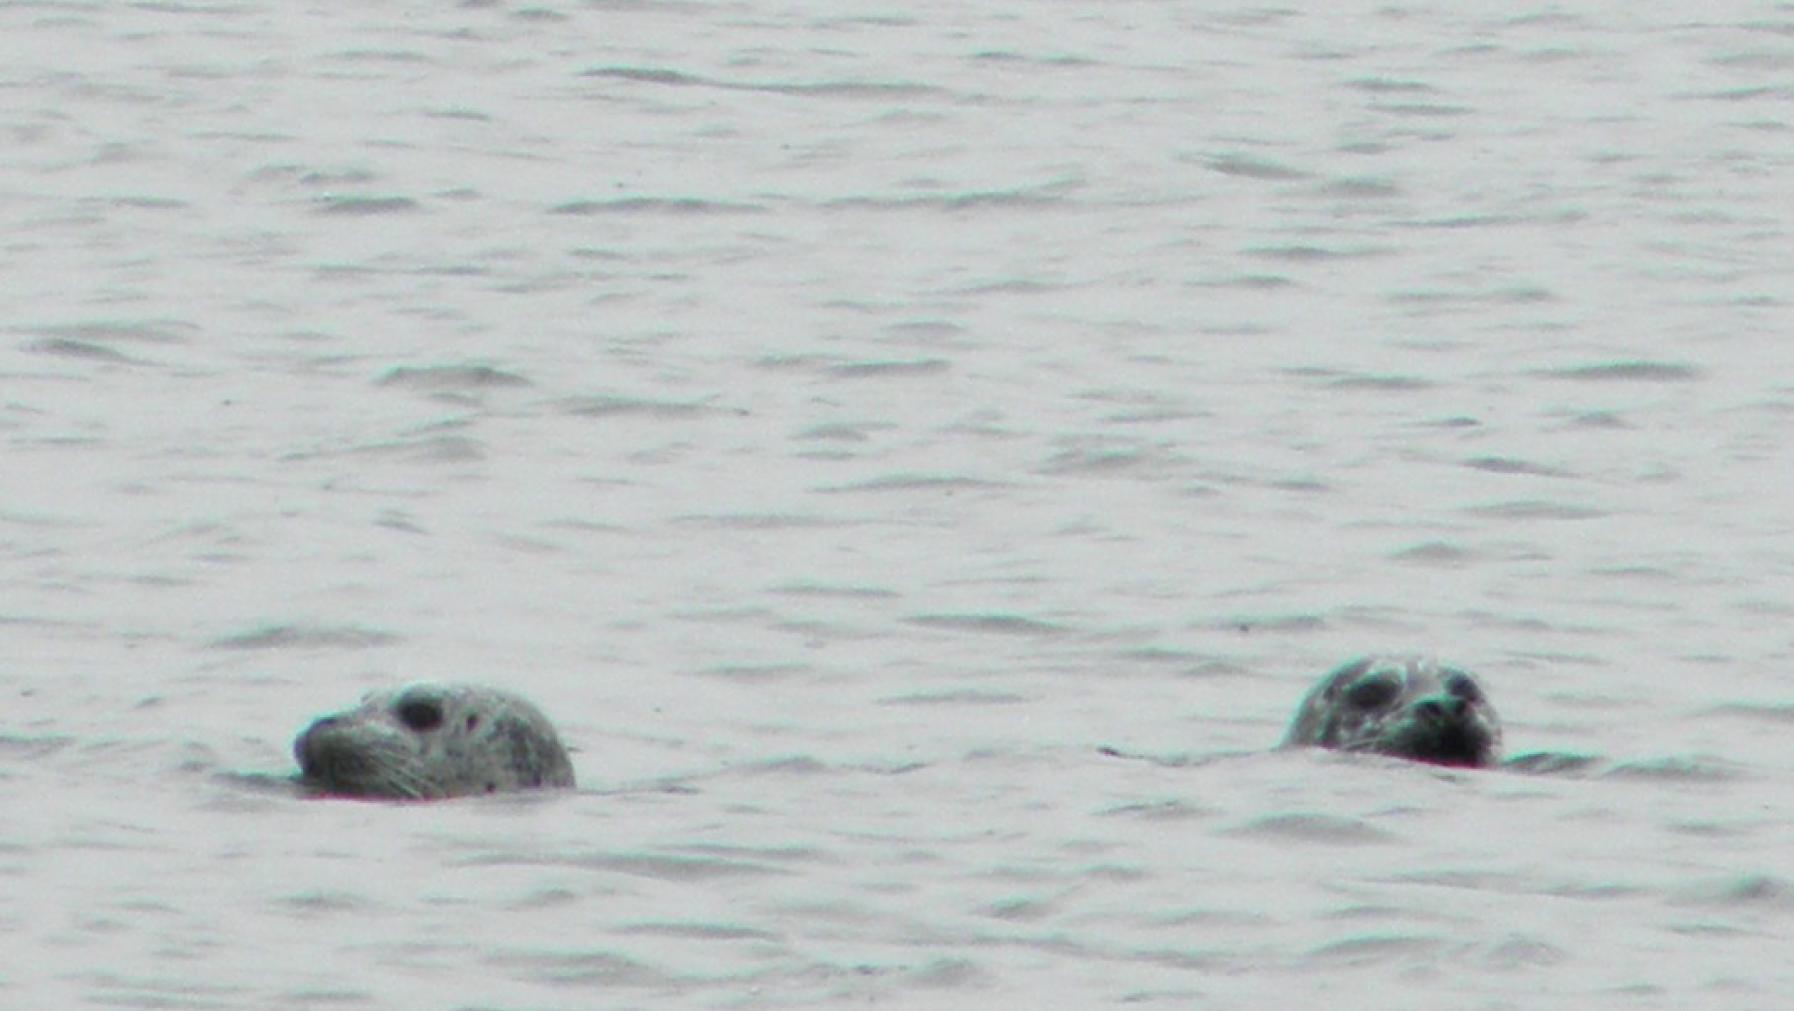 Two seals in water.